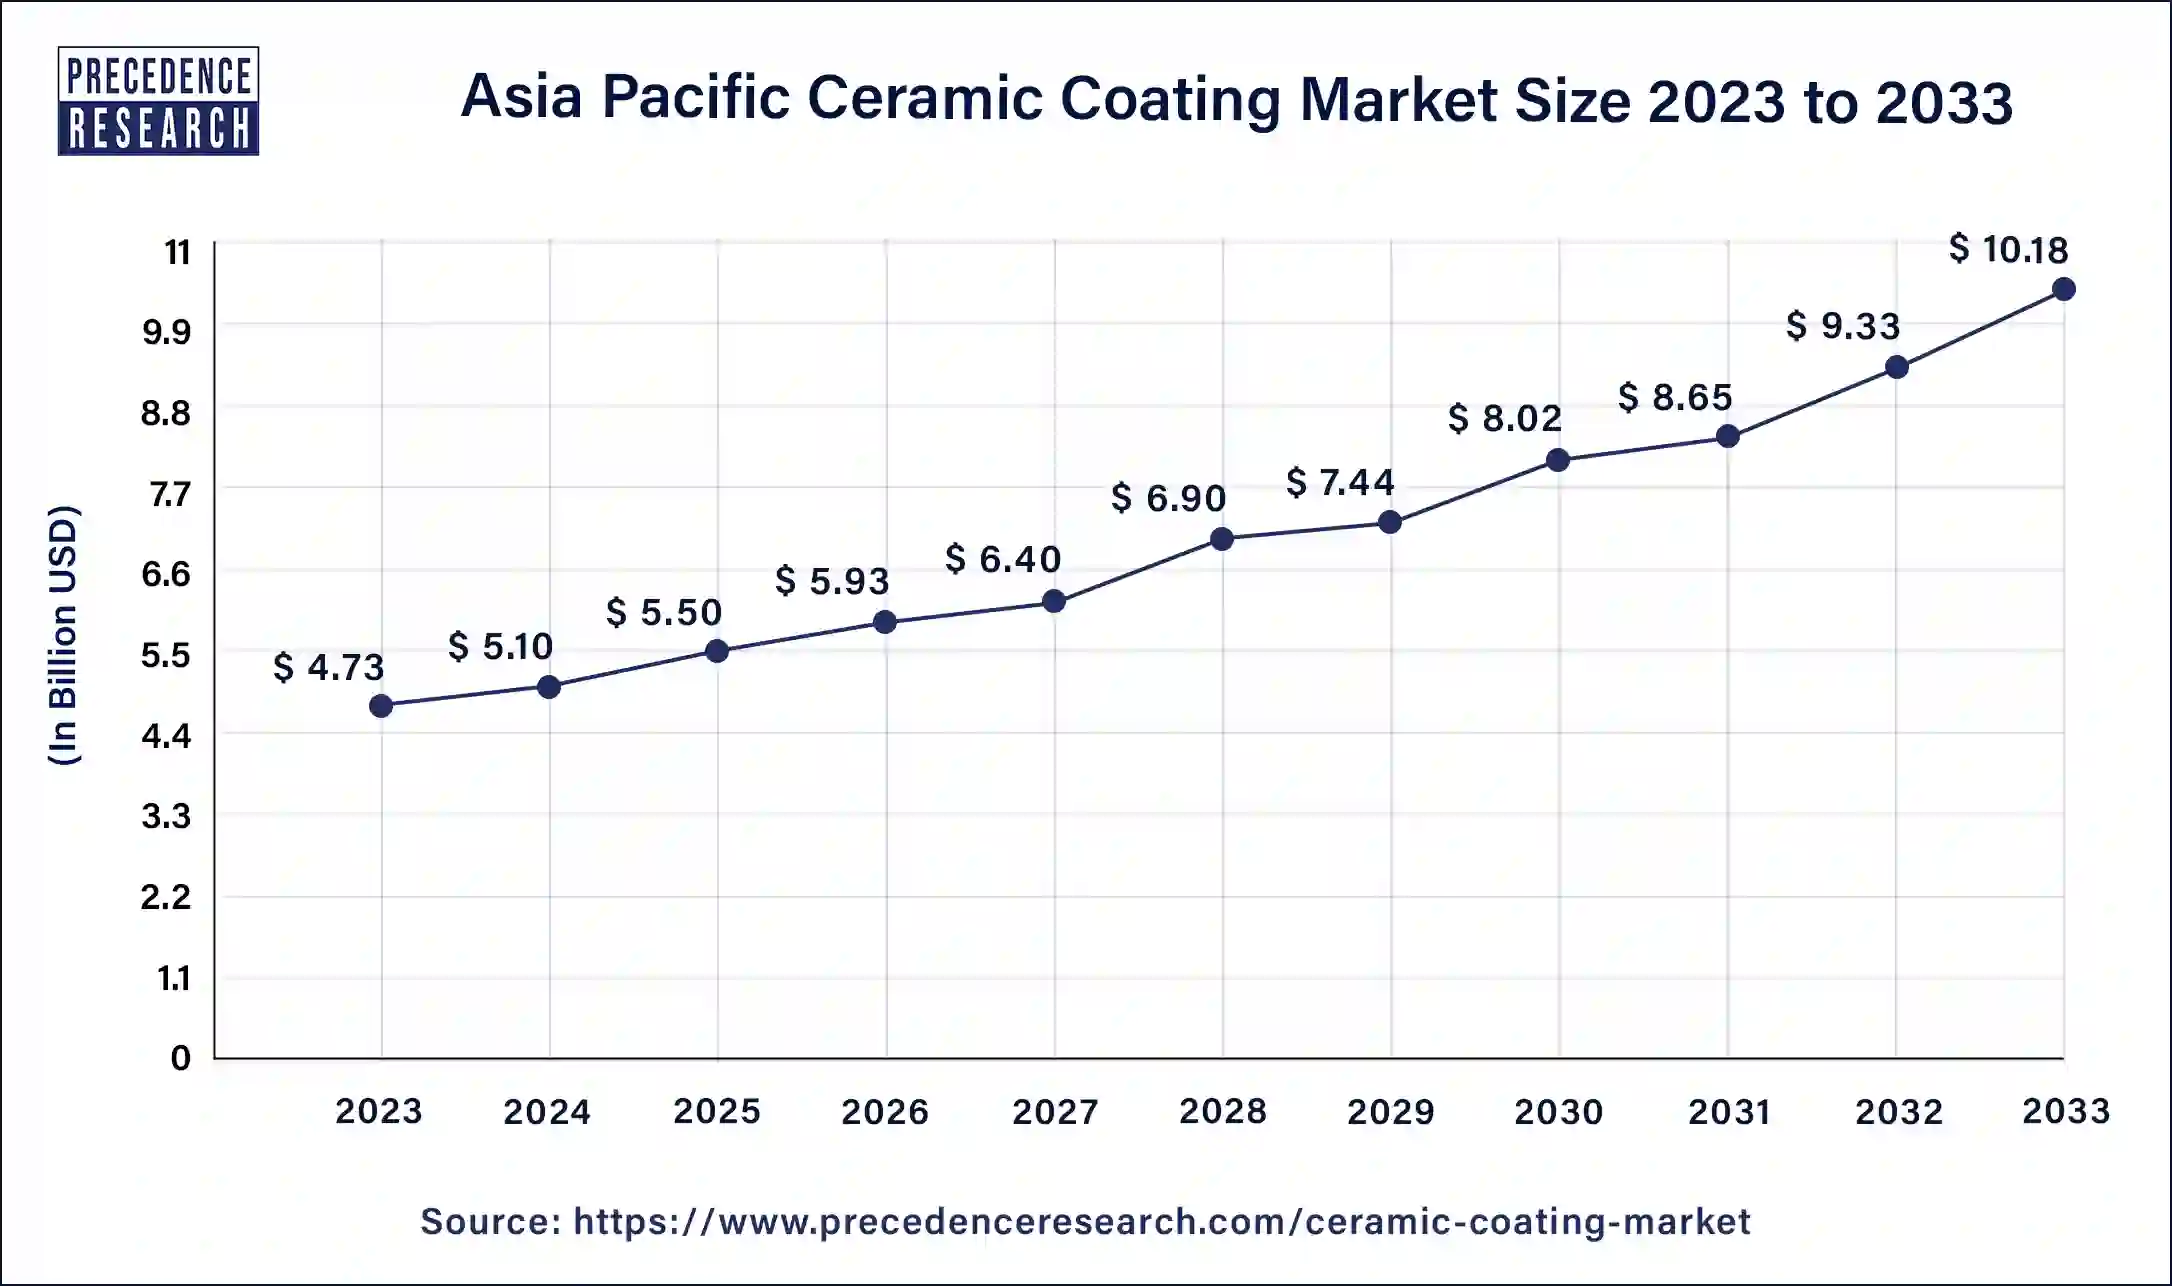 Asia Pacific Ceramic Coating Market Size 2024 to 2033